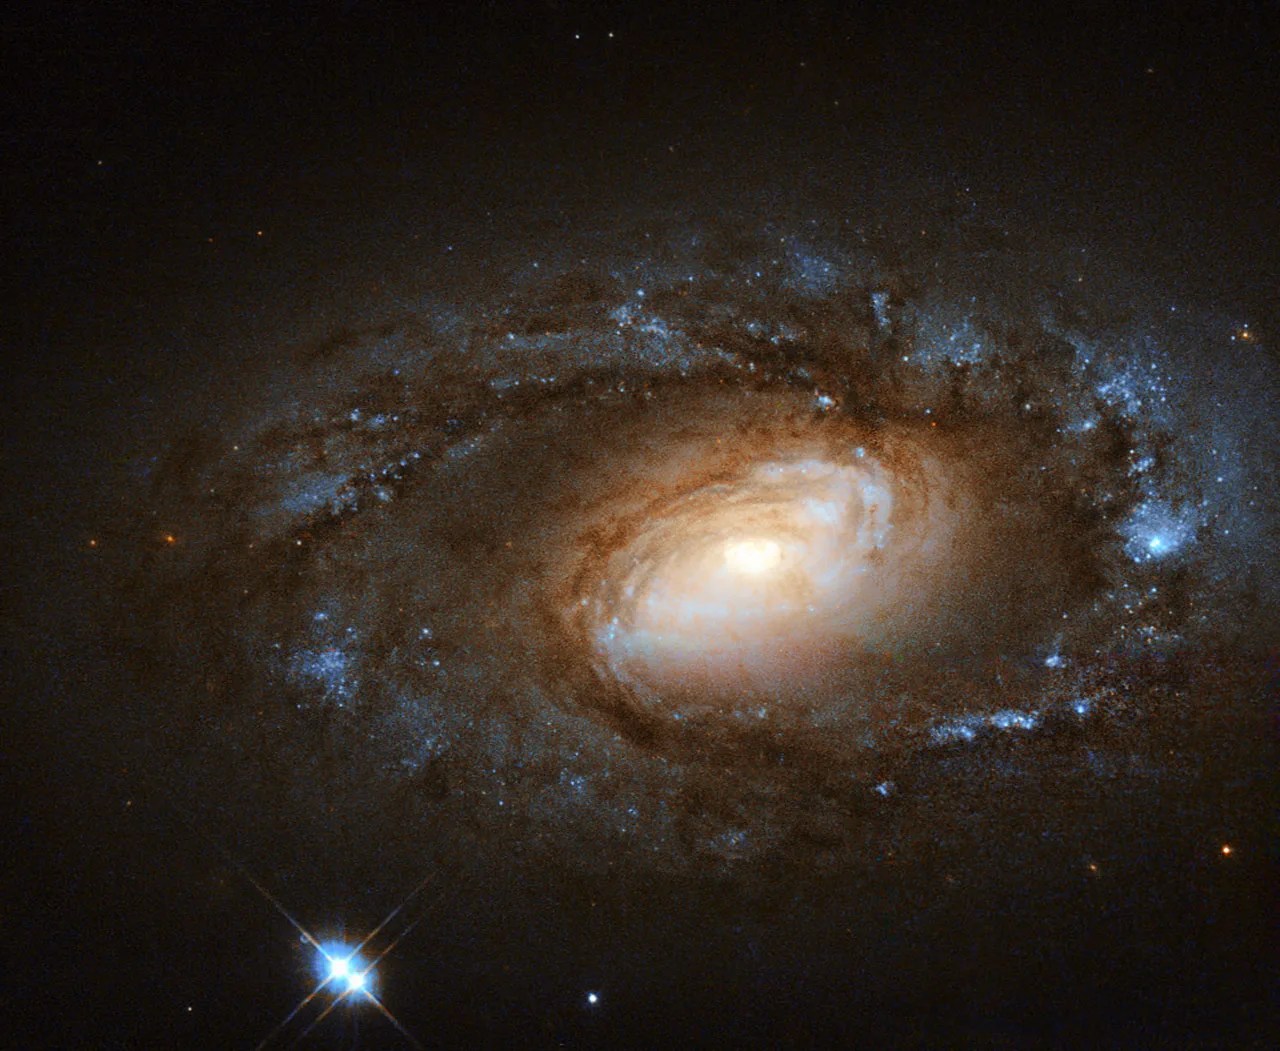 Small, tight spiral galaxy with lots of detail